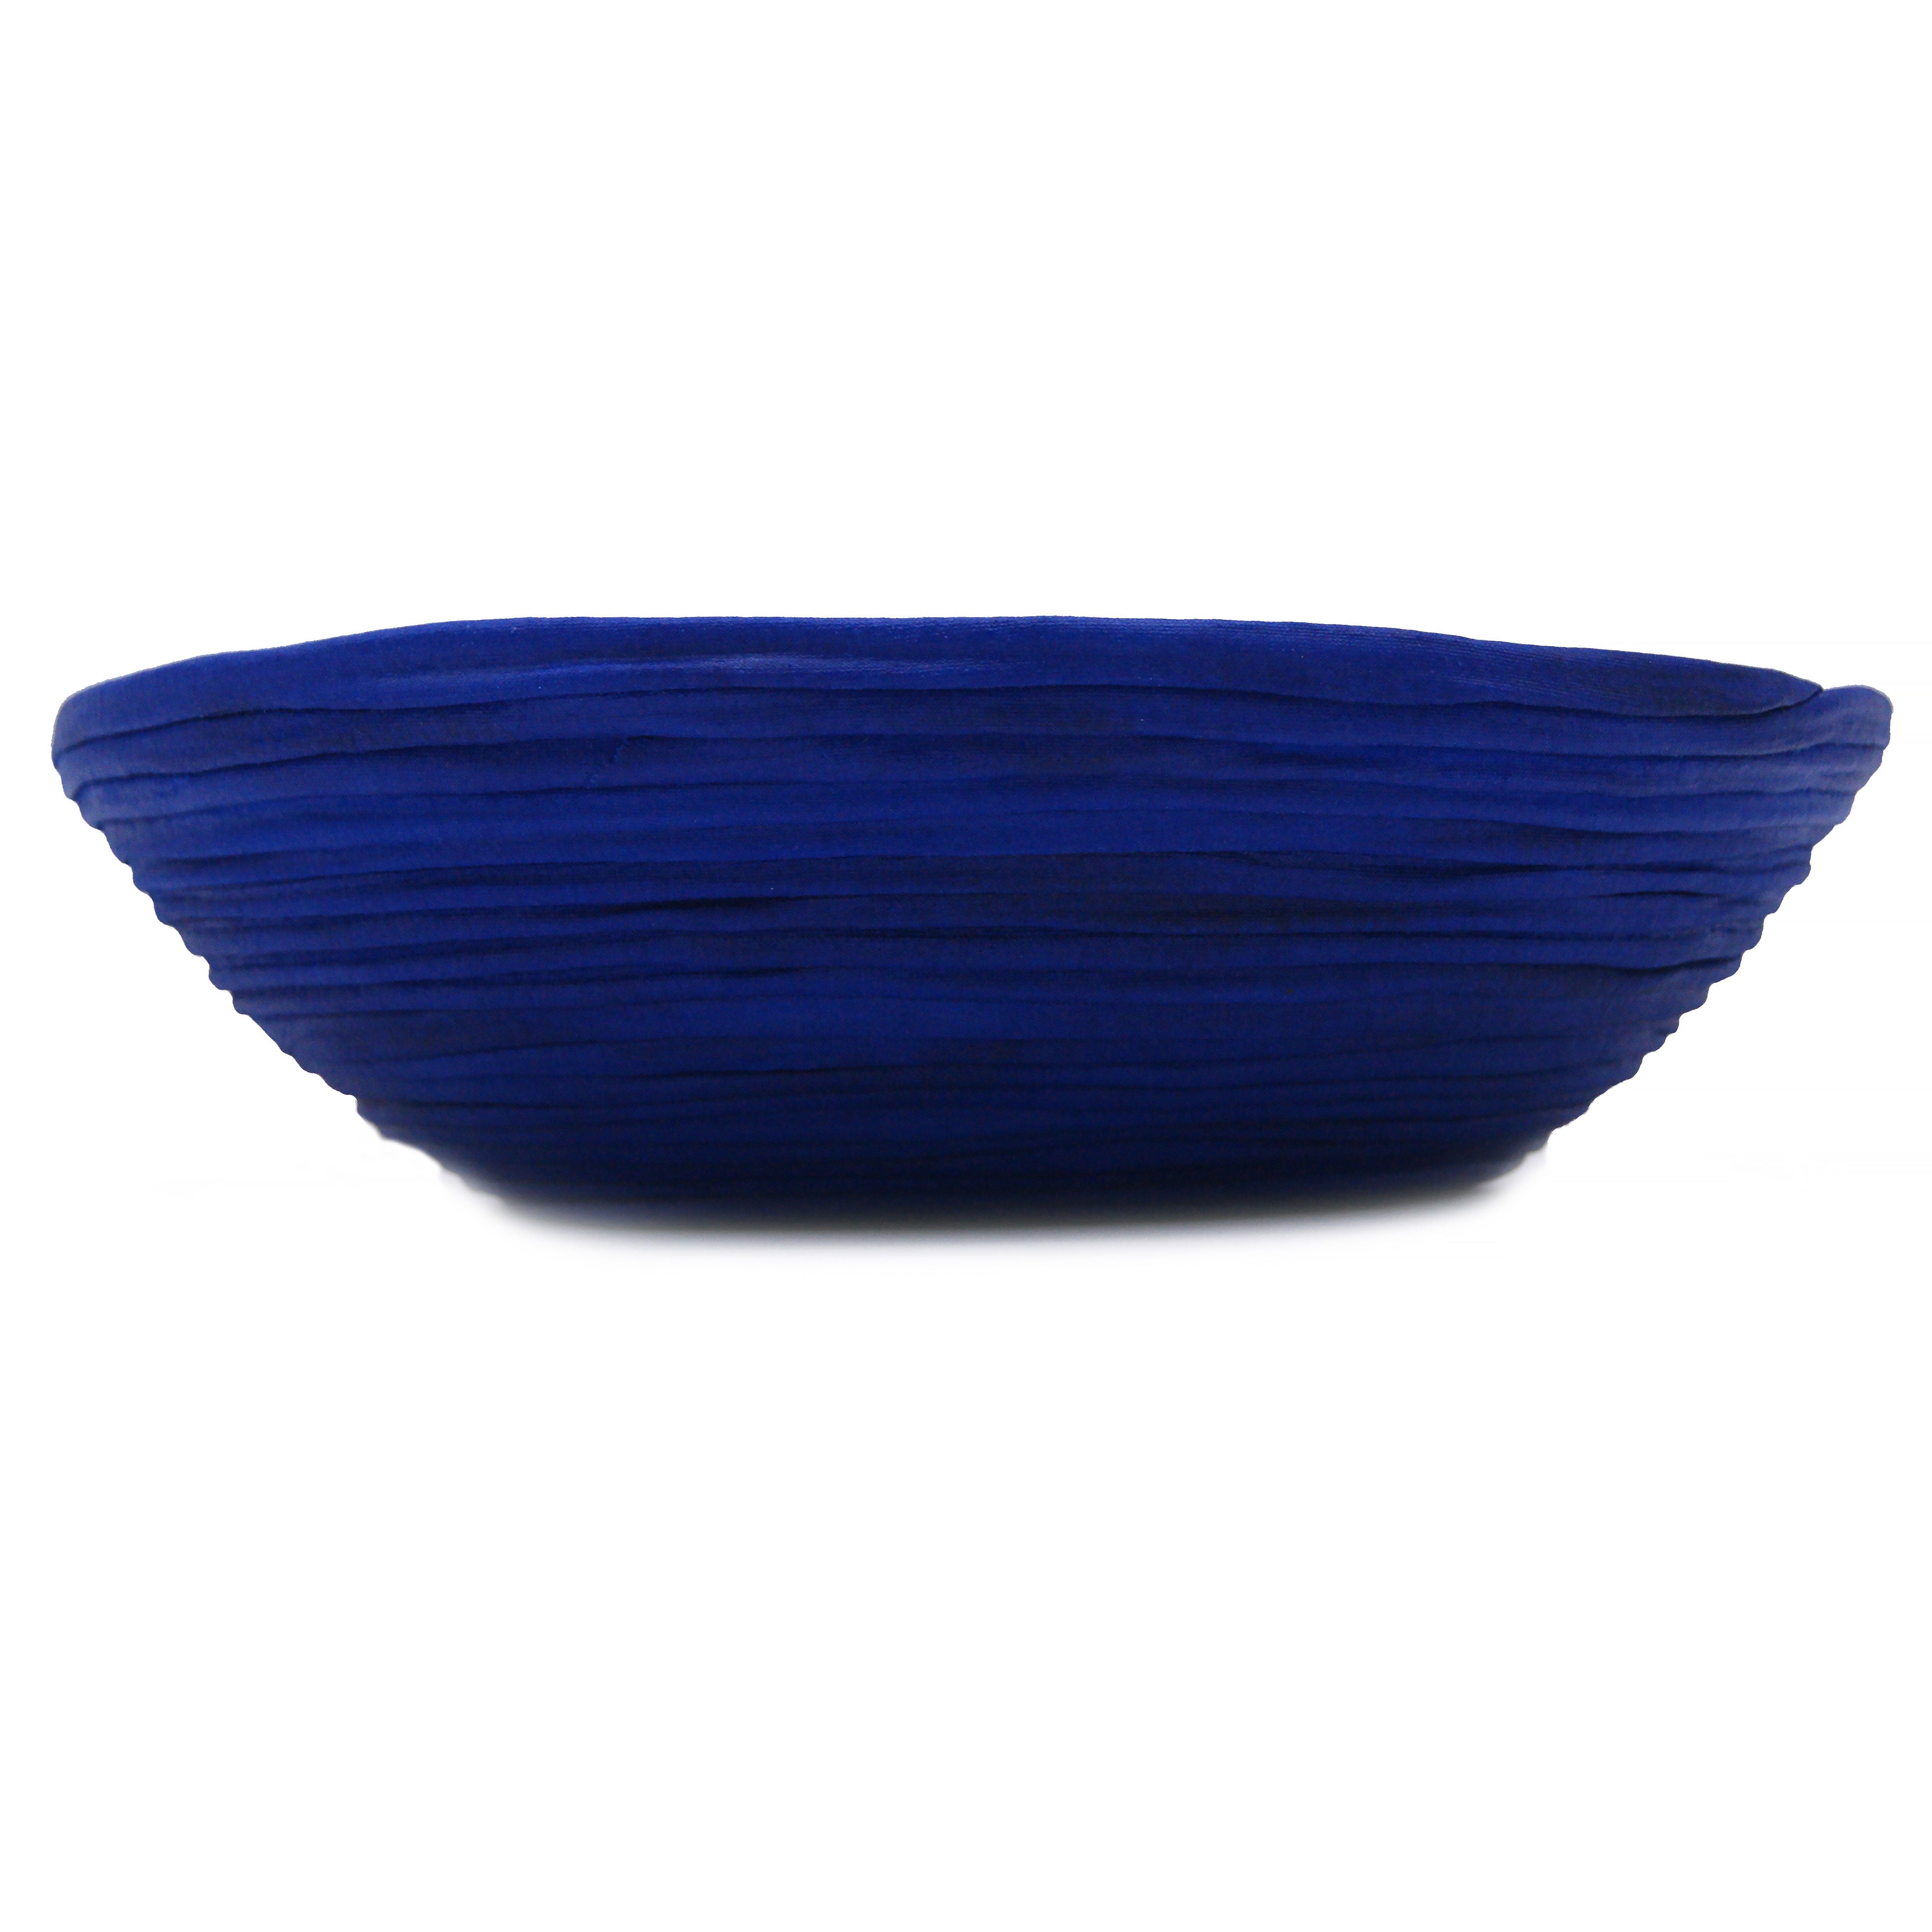 These bowls are developed through a sustainable process that hardens the fabric, making the pieces durable and sturdy